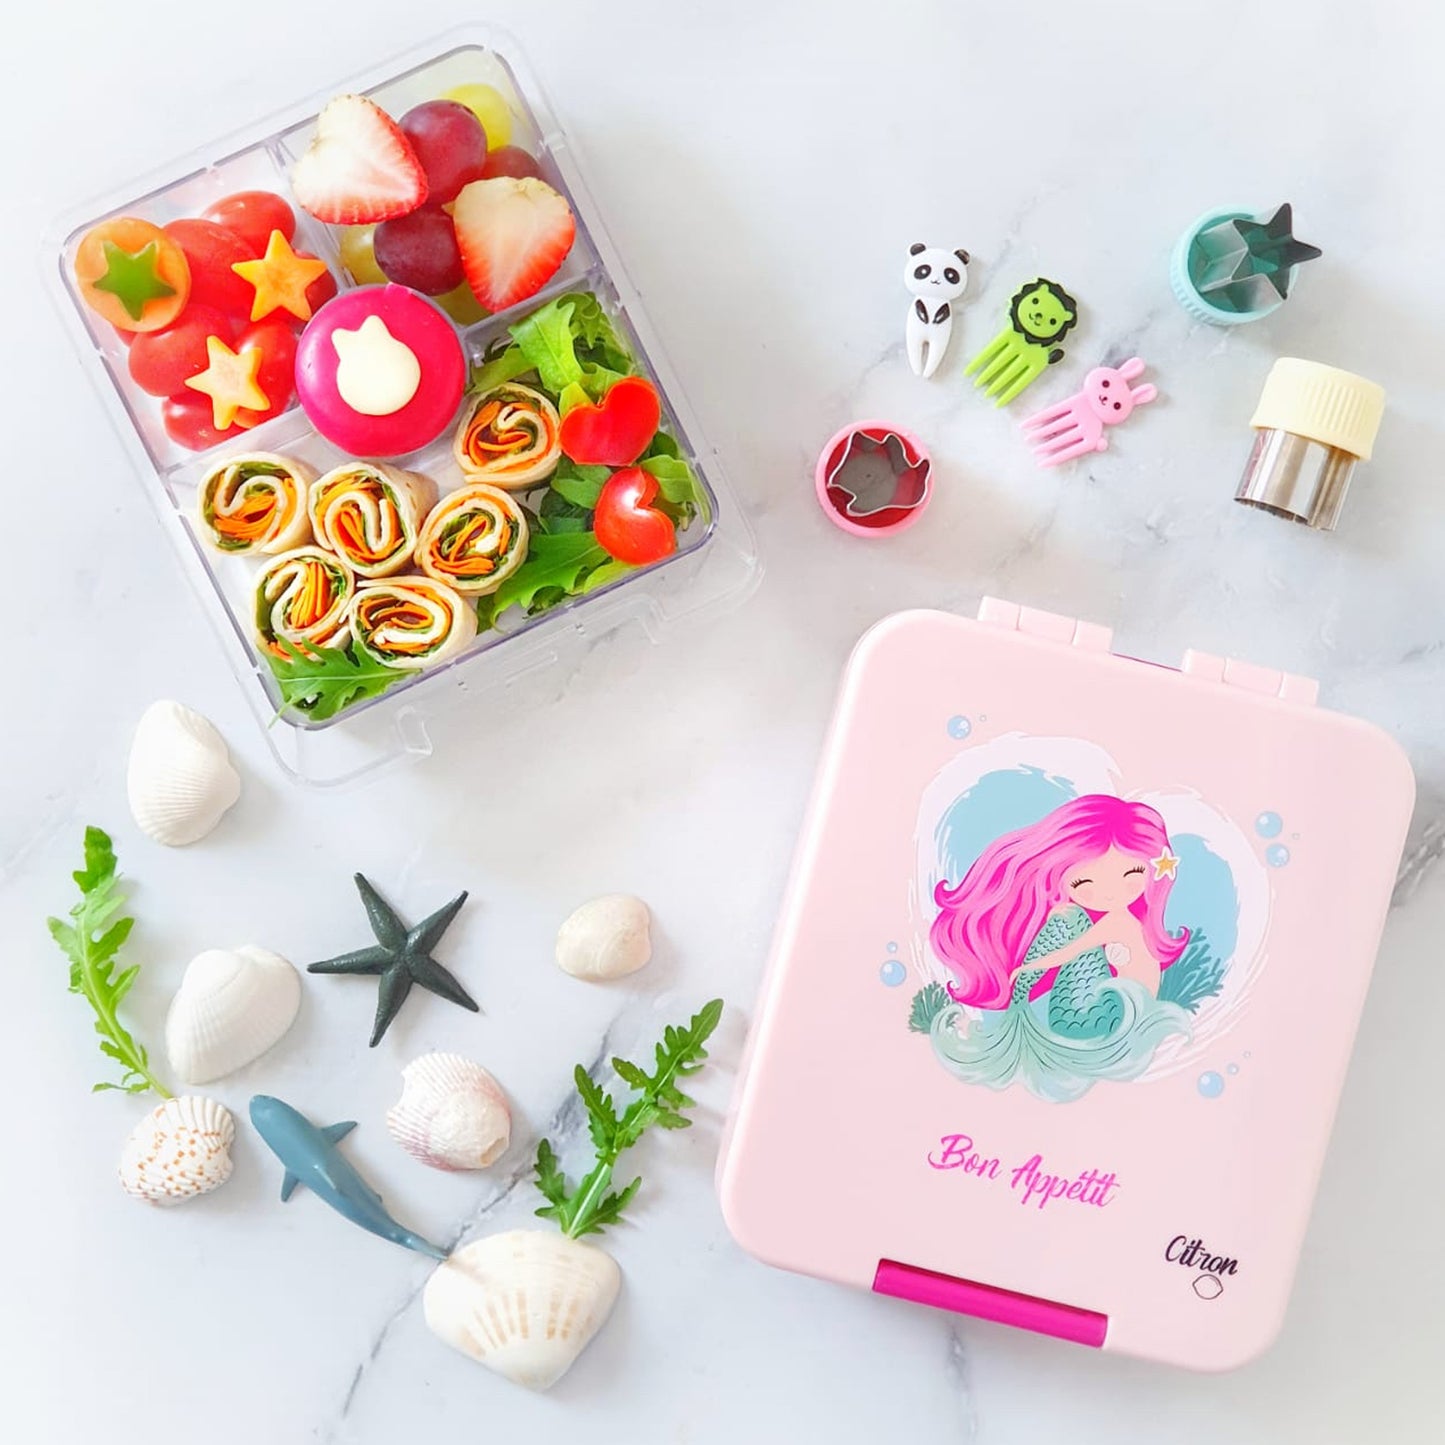 Citron Australia - Snackbox with 4 compartments with accessories - Mermaid